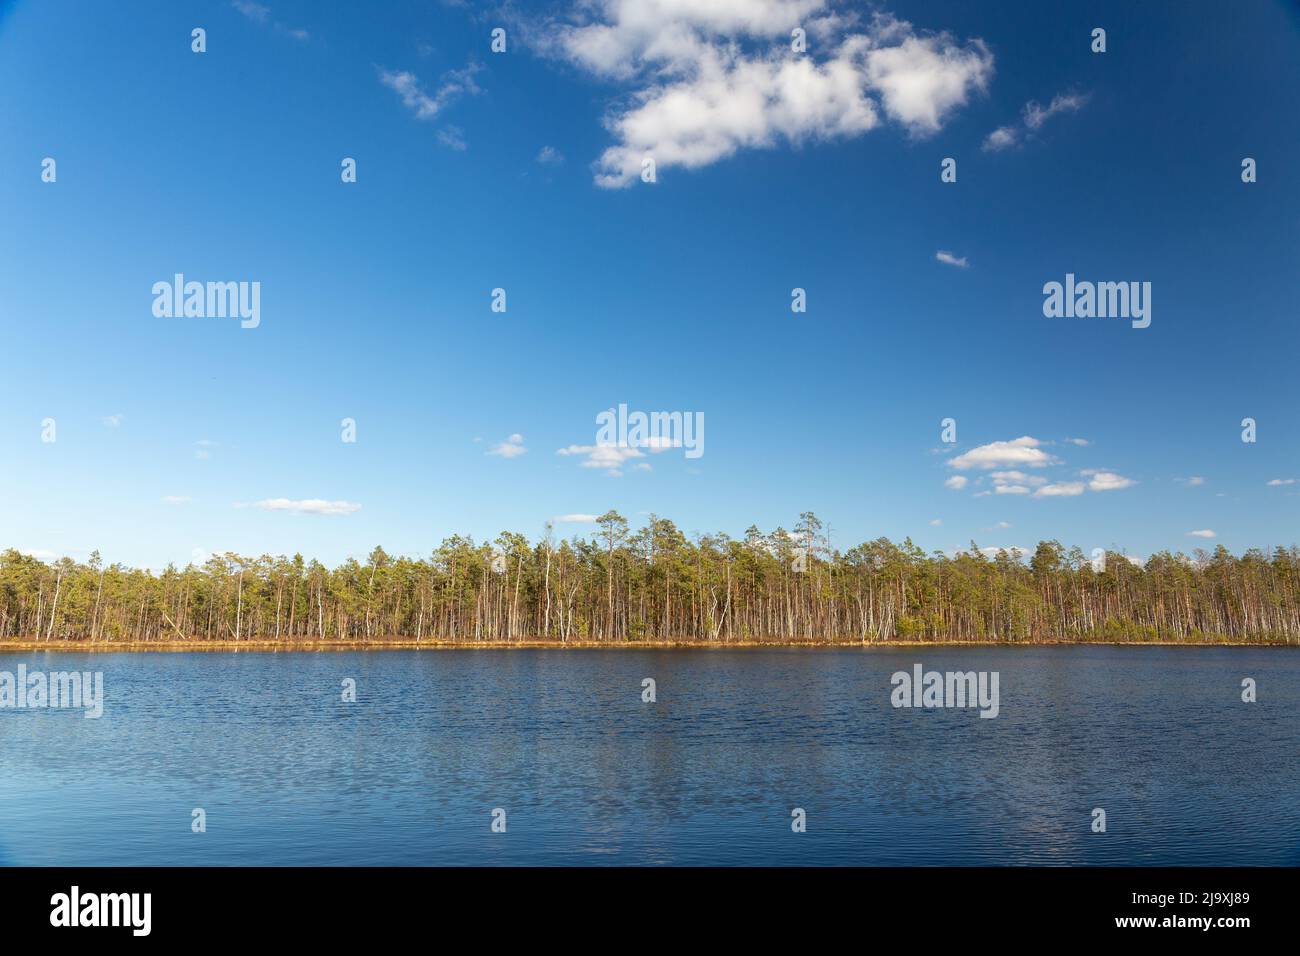 Small swamp lake in the wild pine forest in spring in Belarus. The black color of the water is due to the peat bottom. Environmental protection concep Stock Photo